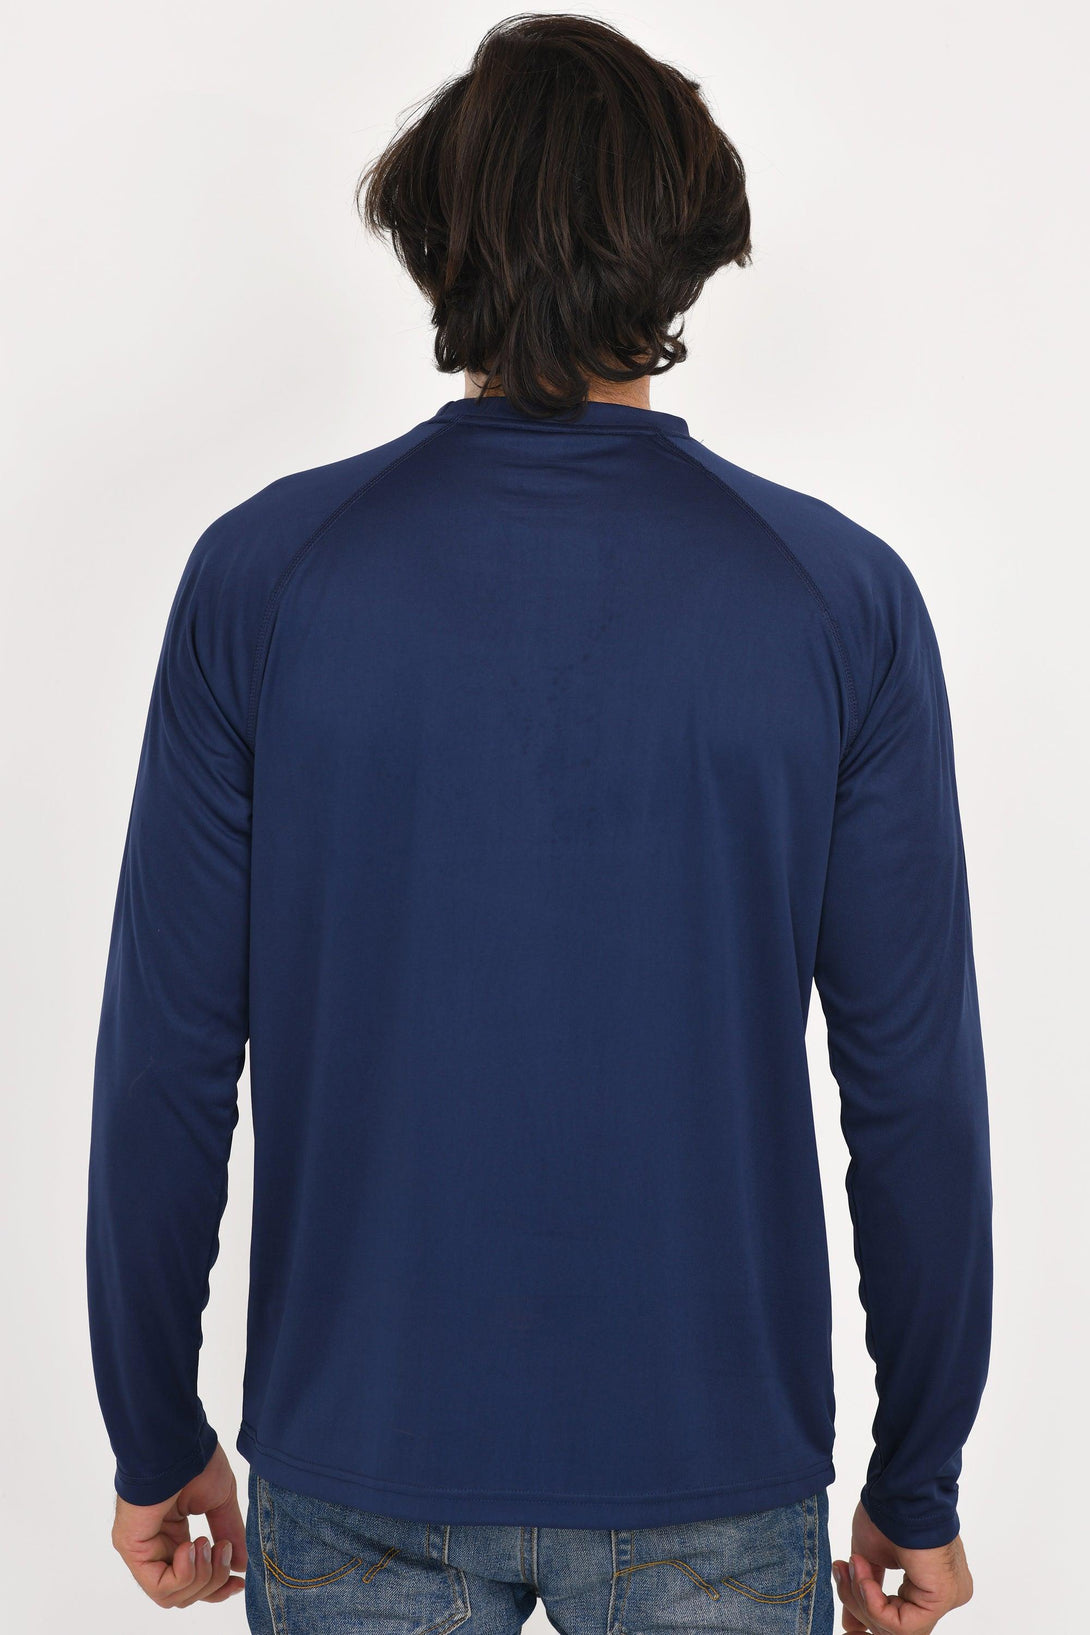 Polyester Full sleeve T-Shirts | RED - NAVY - Pack of 2 - FTS